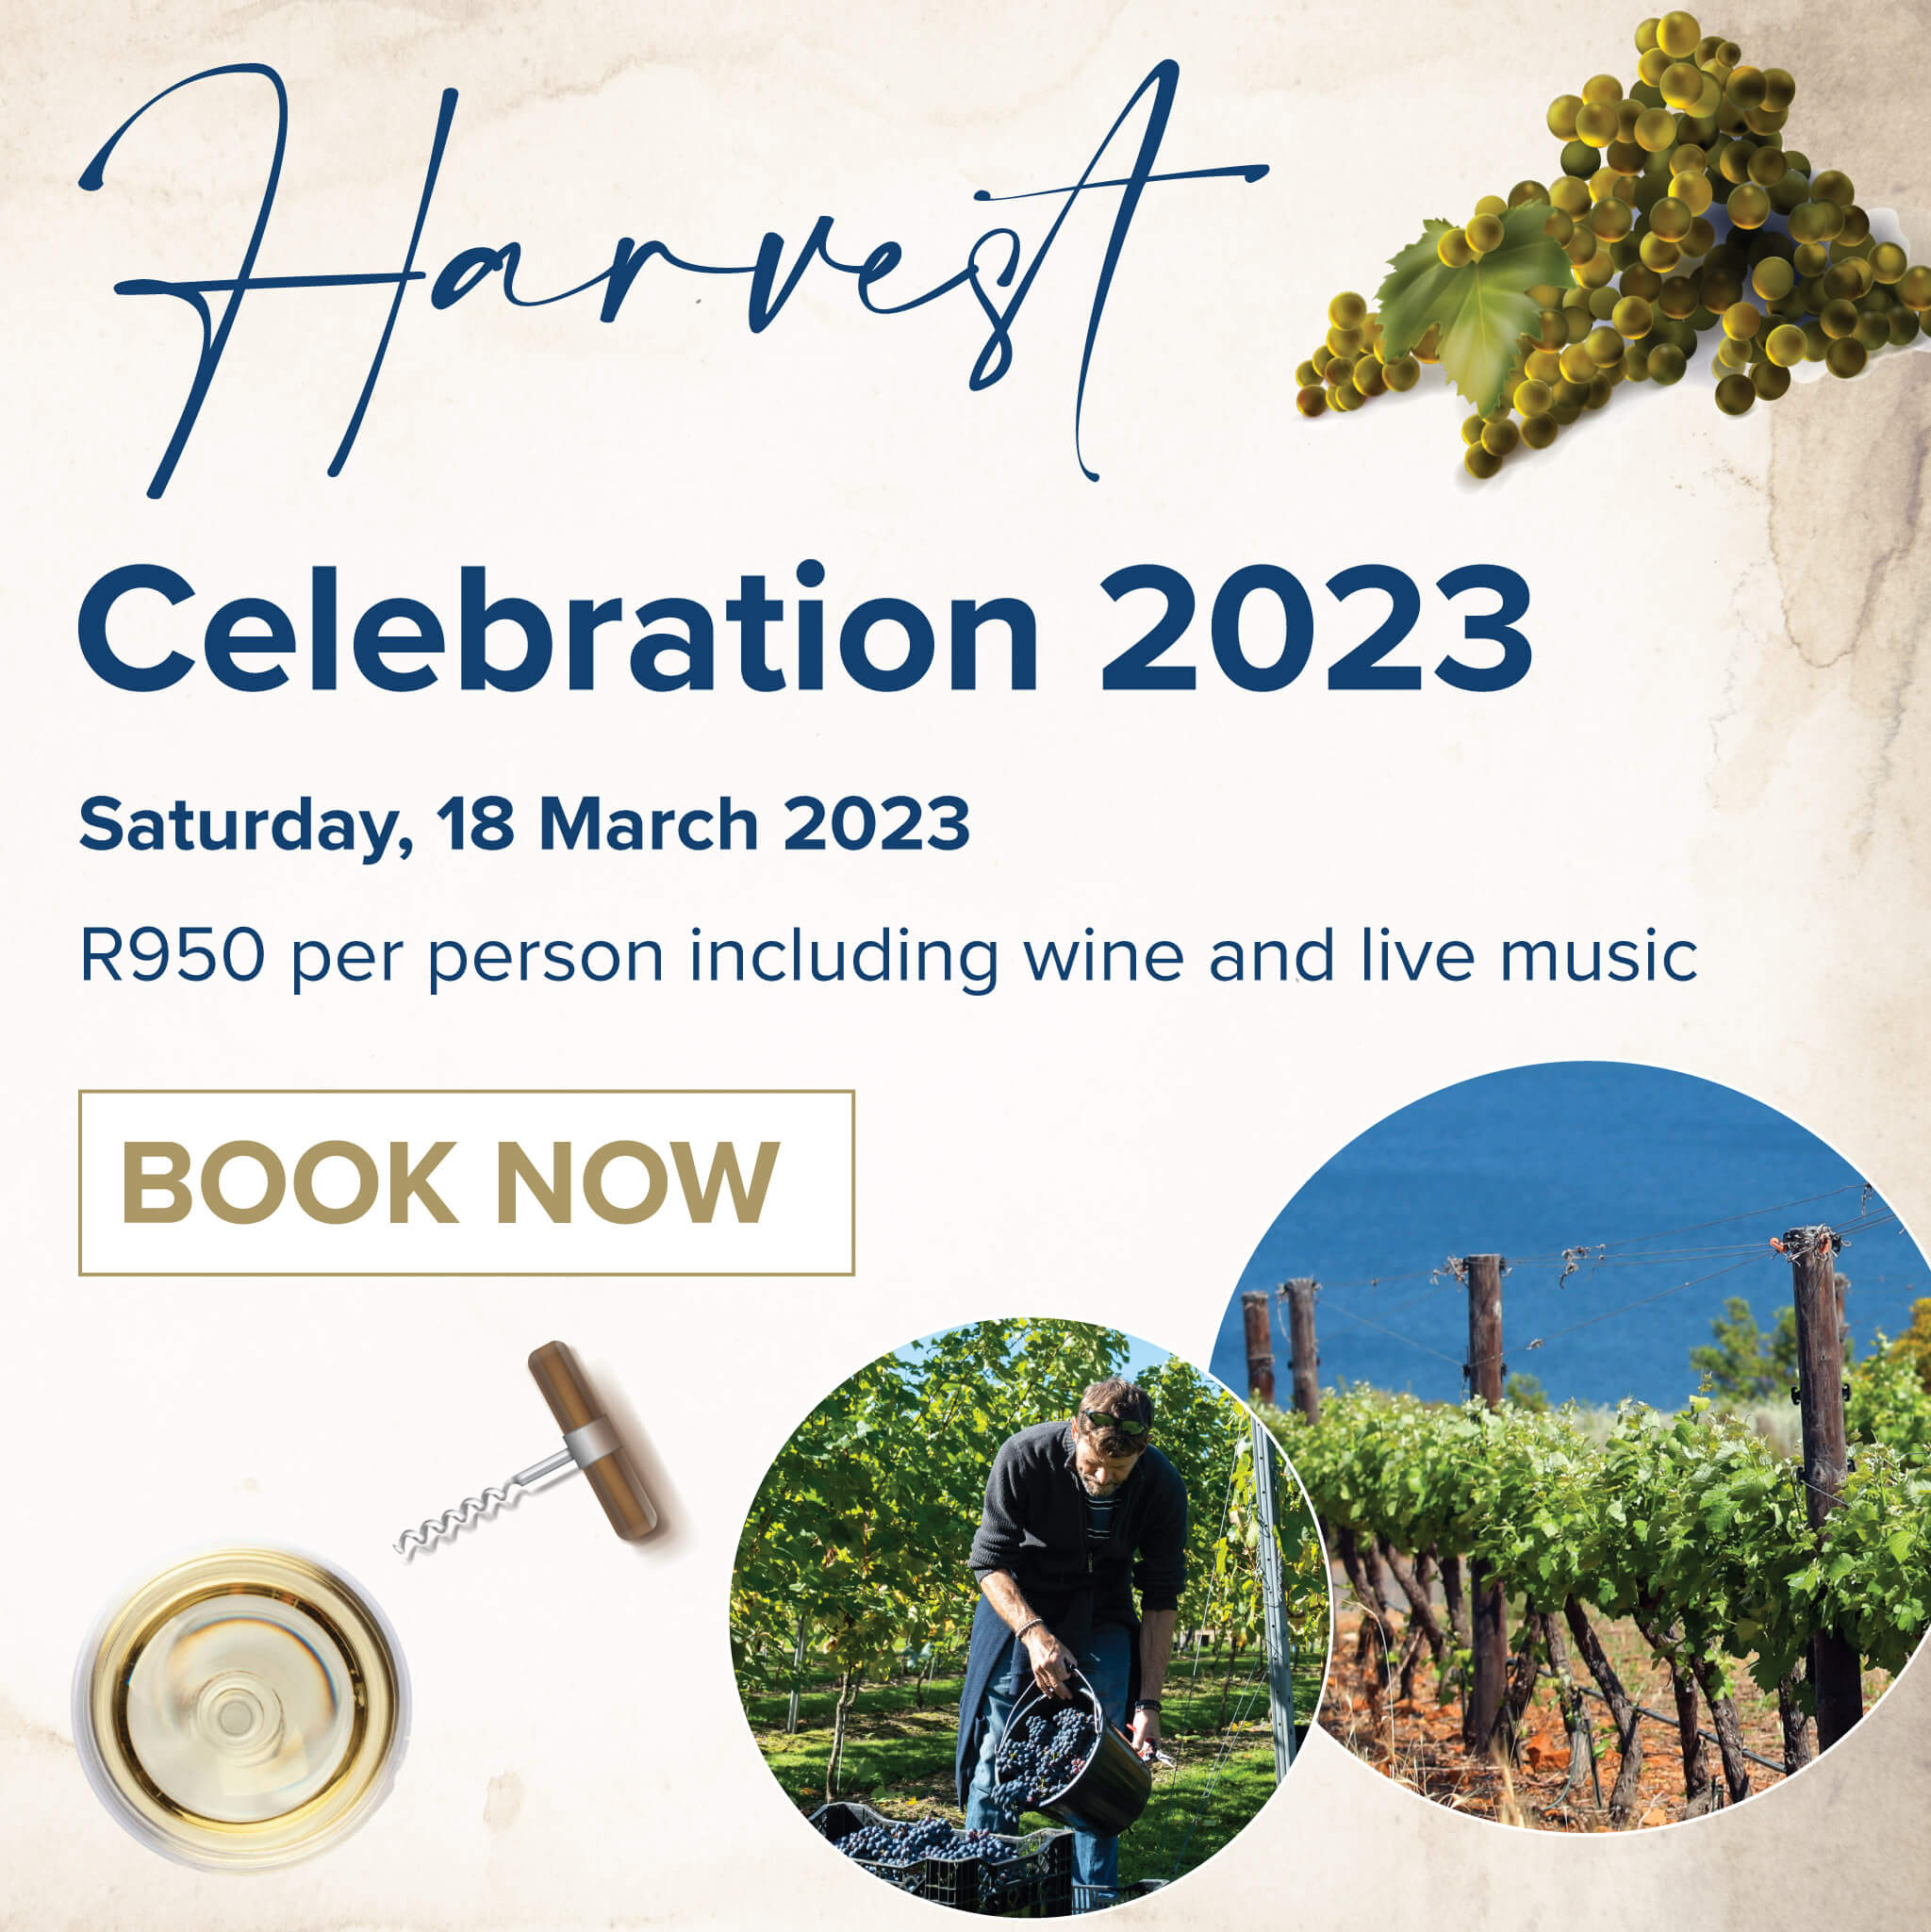 Book Now for the Harvest Celebration at Benguela Cove photo